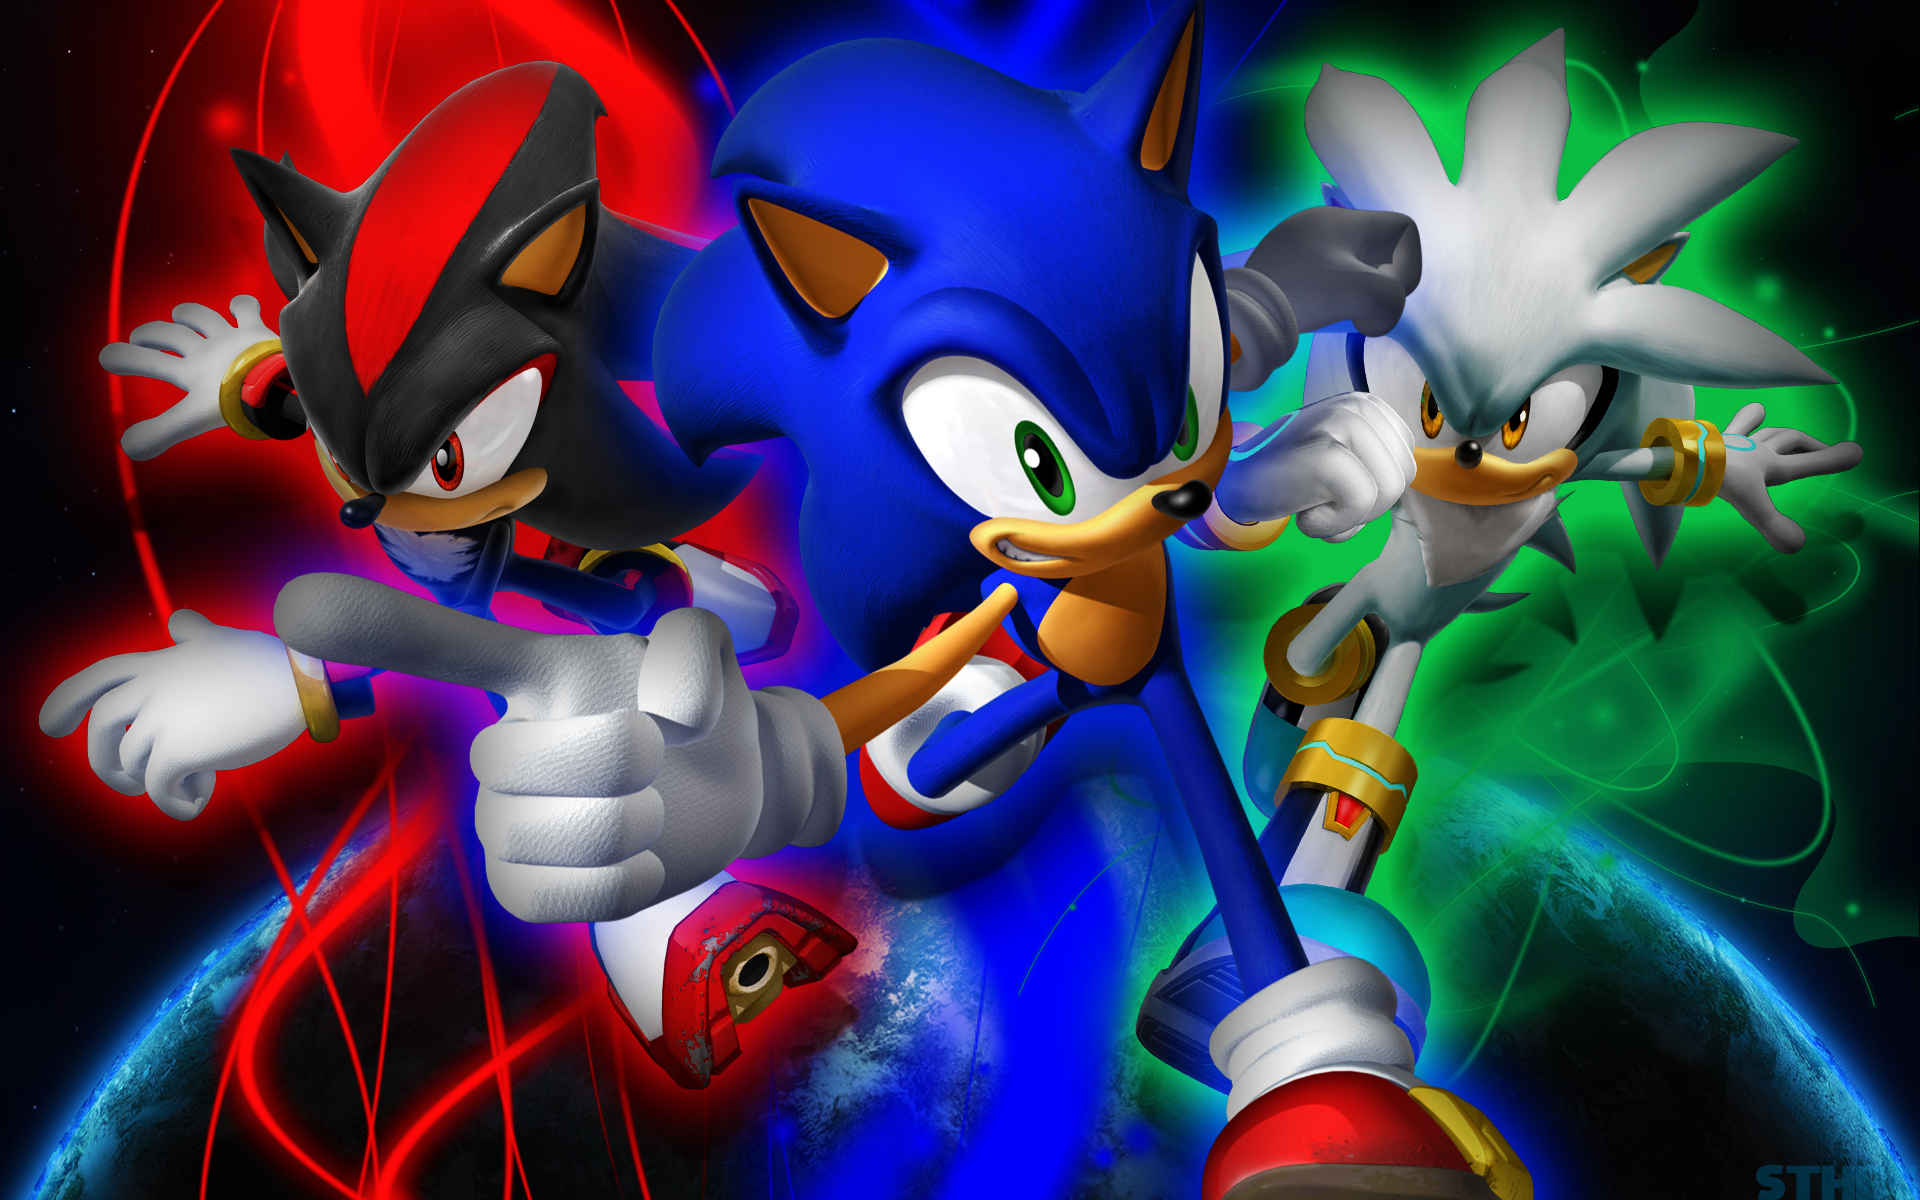 SonicShadow And Silver   Wallpaper by SonicTheHedgehogBG on